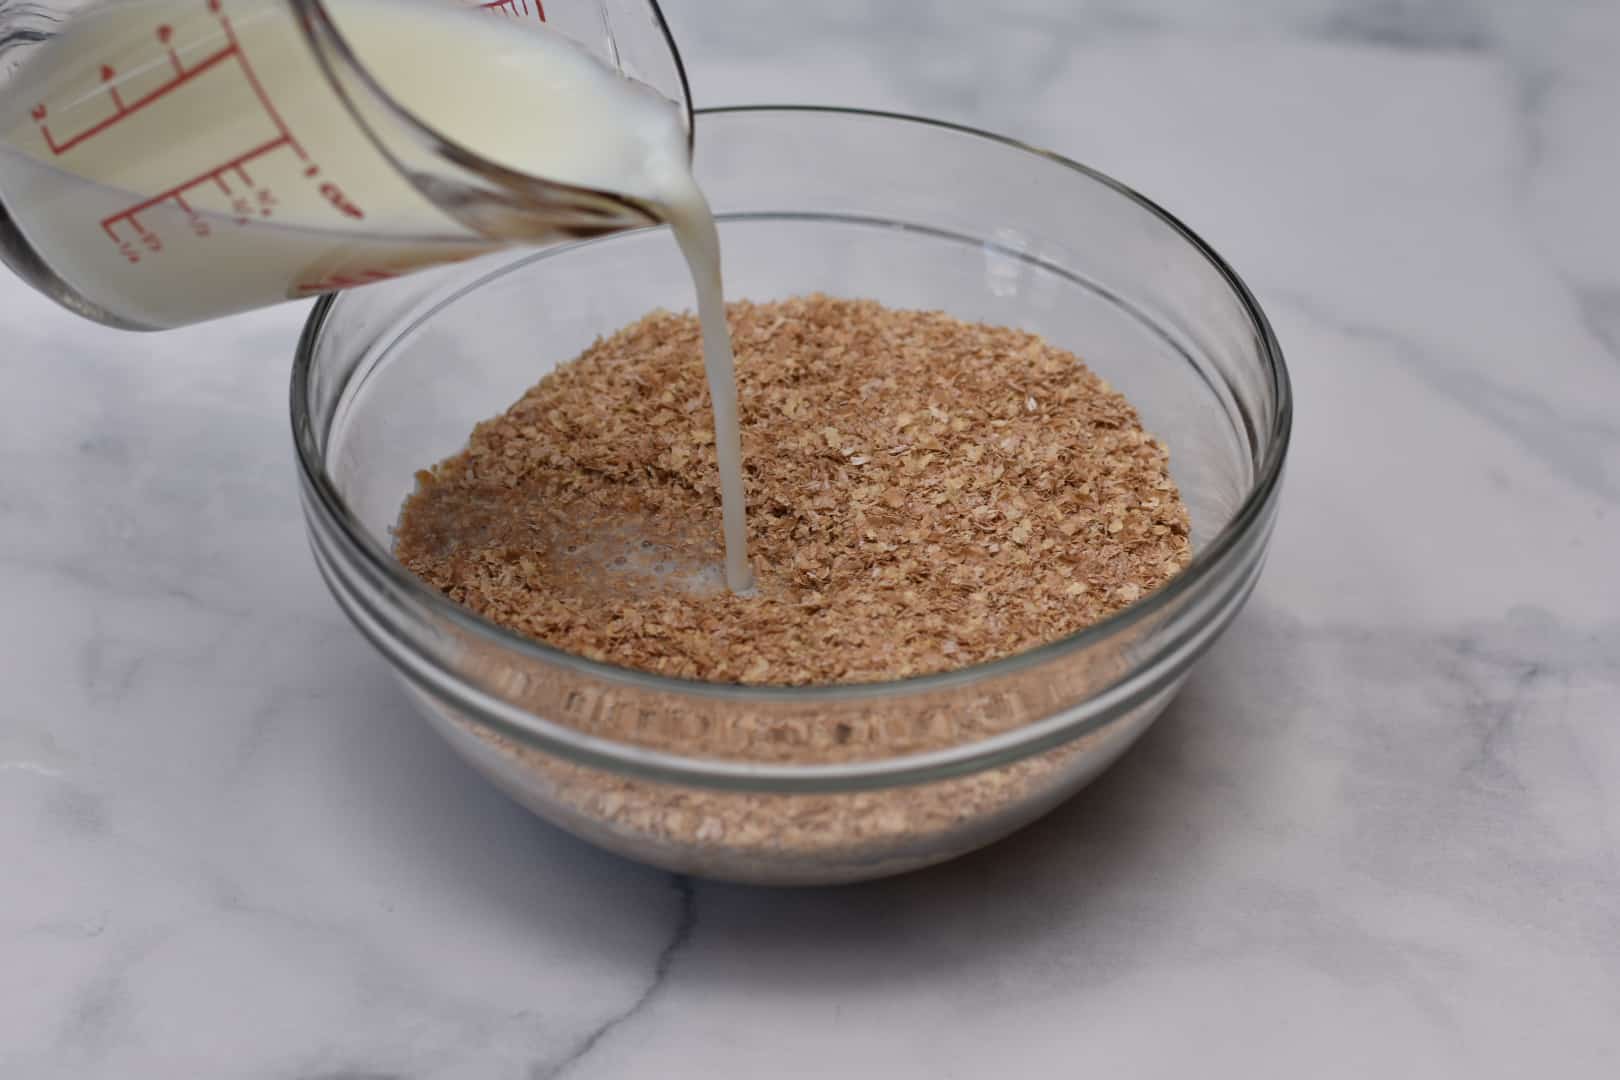 skim milk being poured into bowl of oat bran